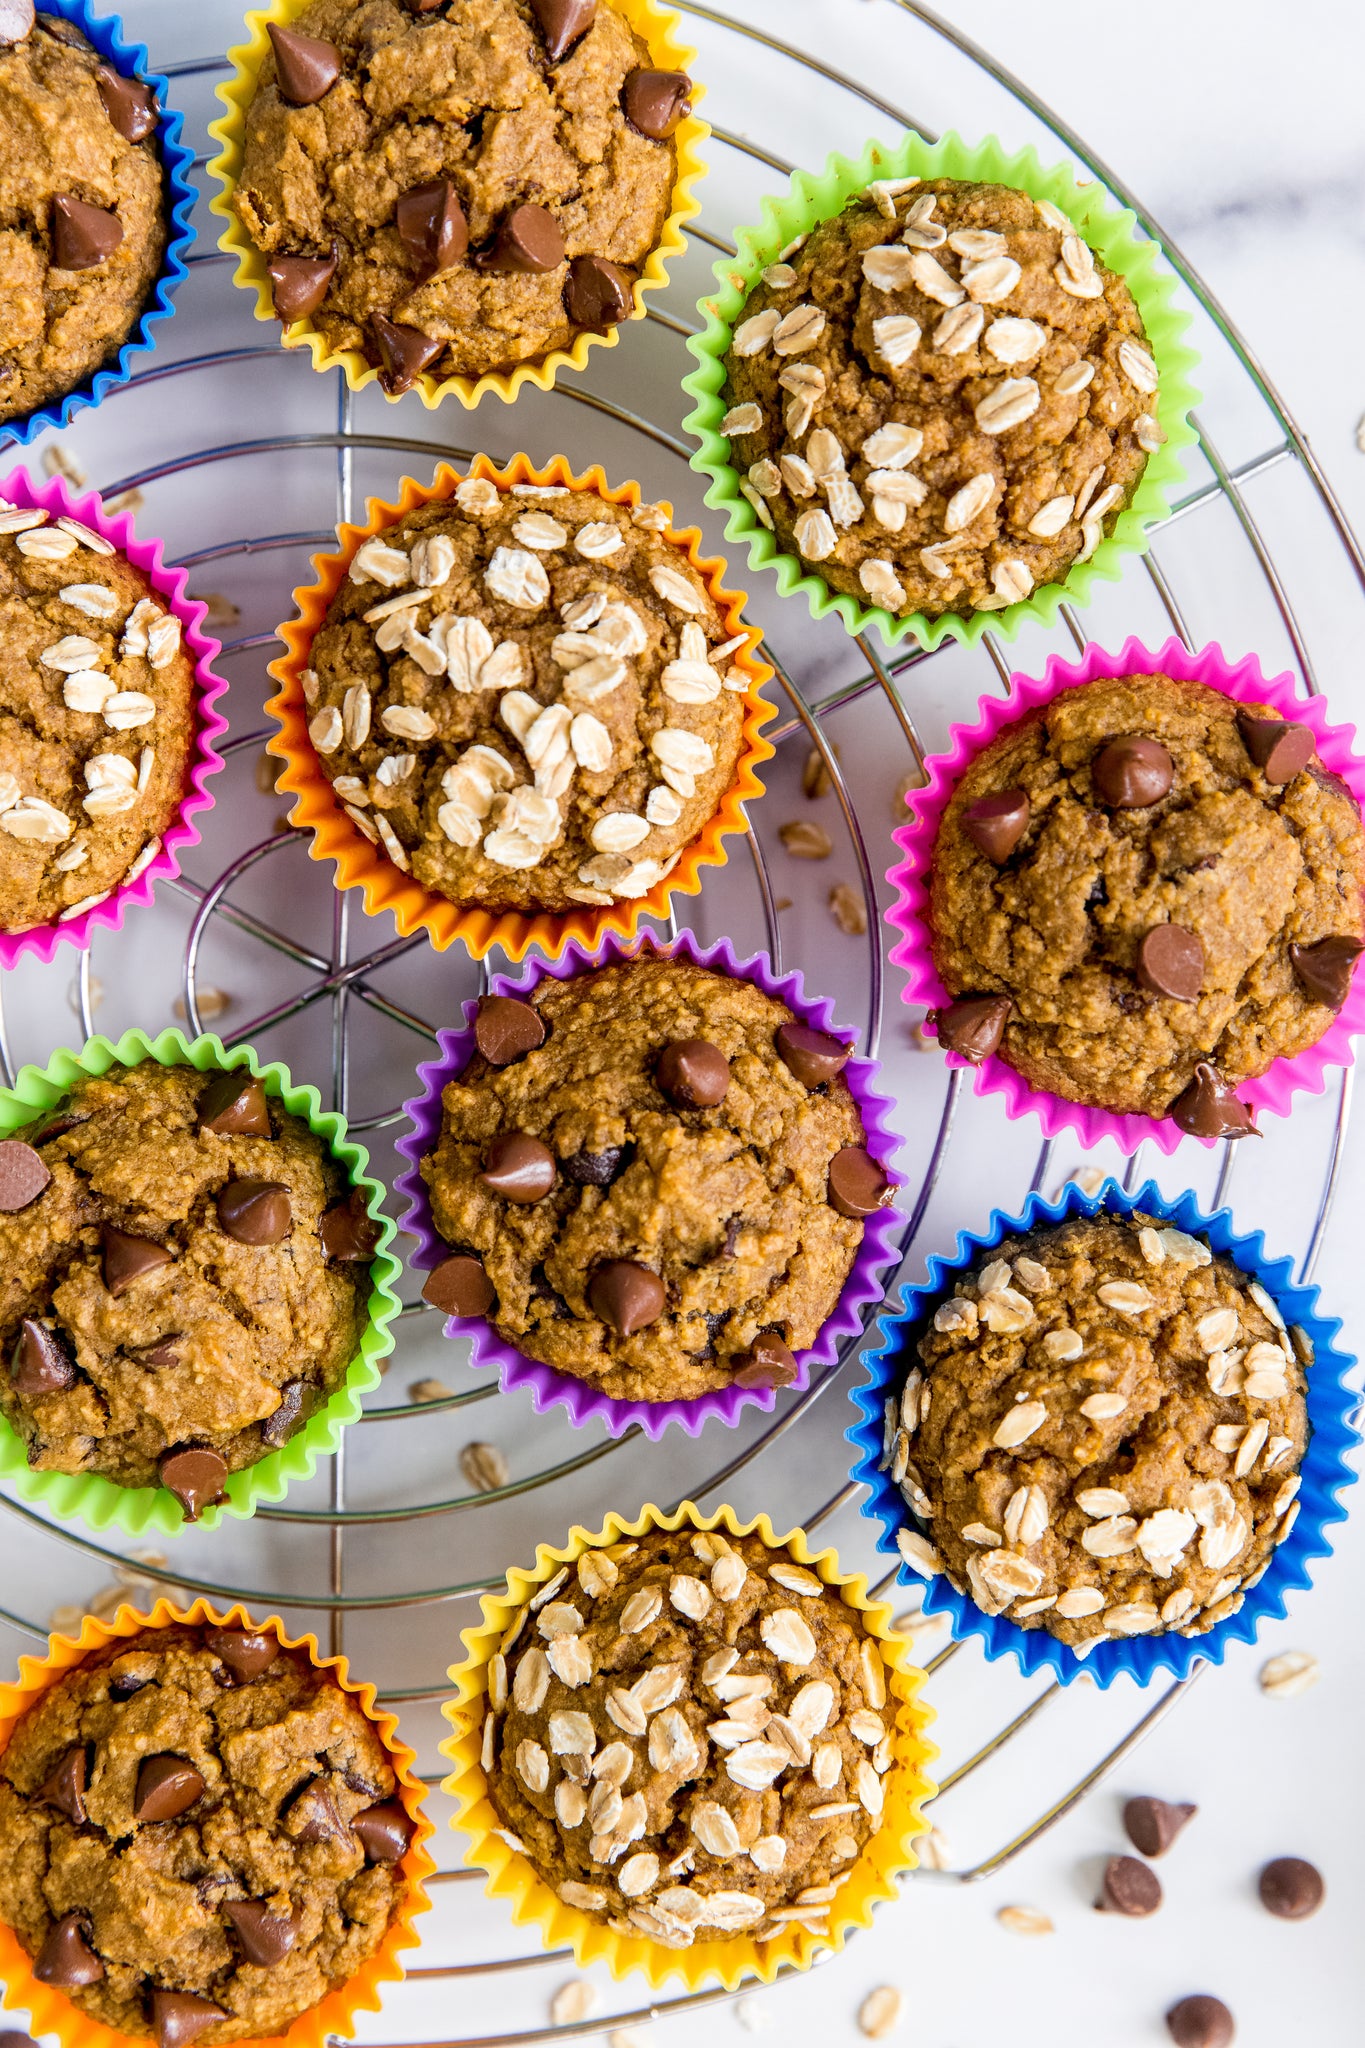 healthy foods options for picky eater - else pumpkin spice muffins